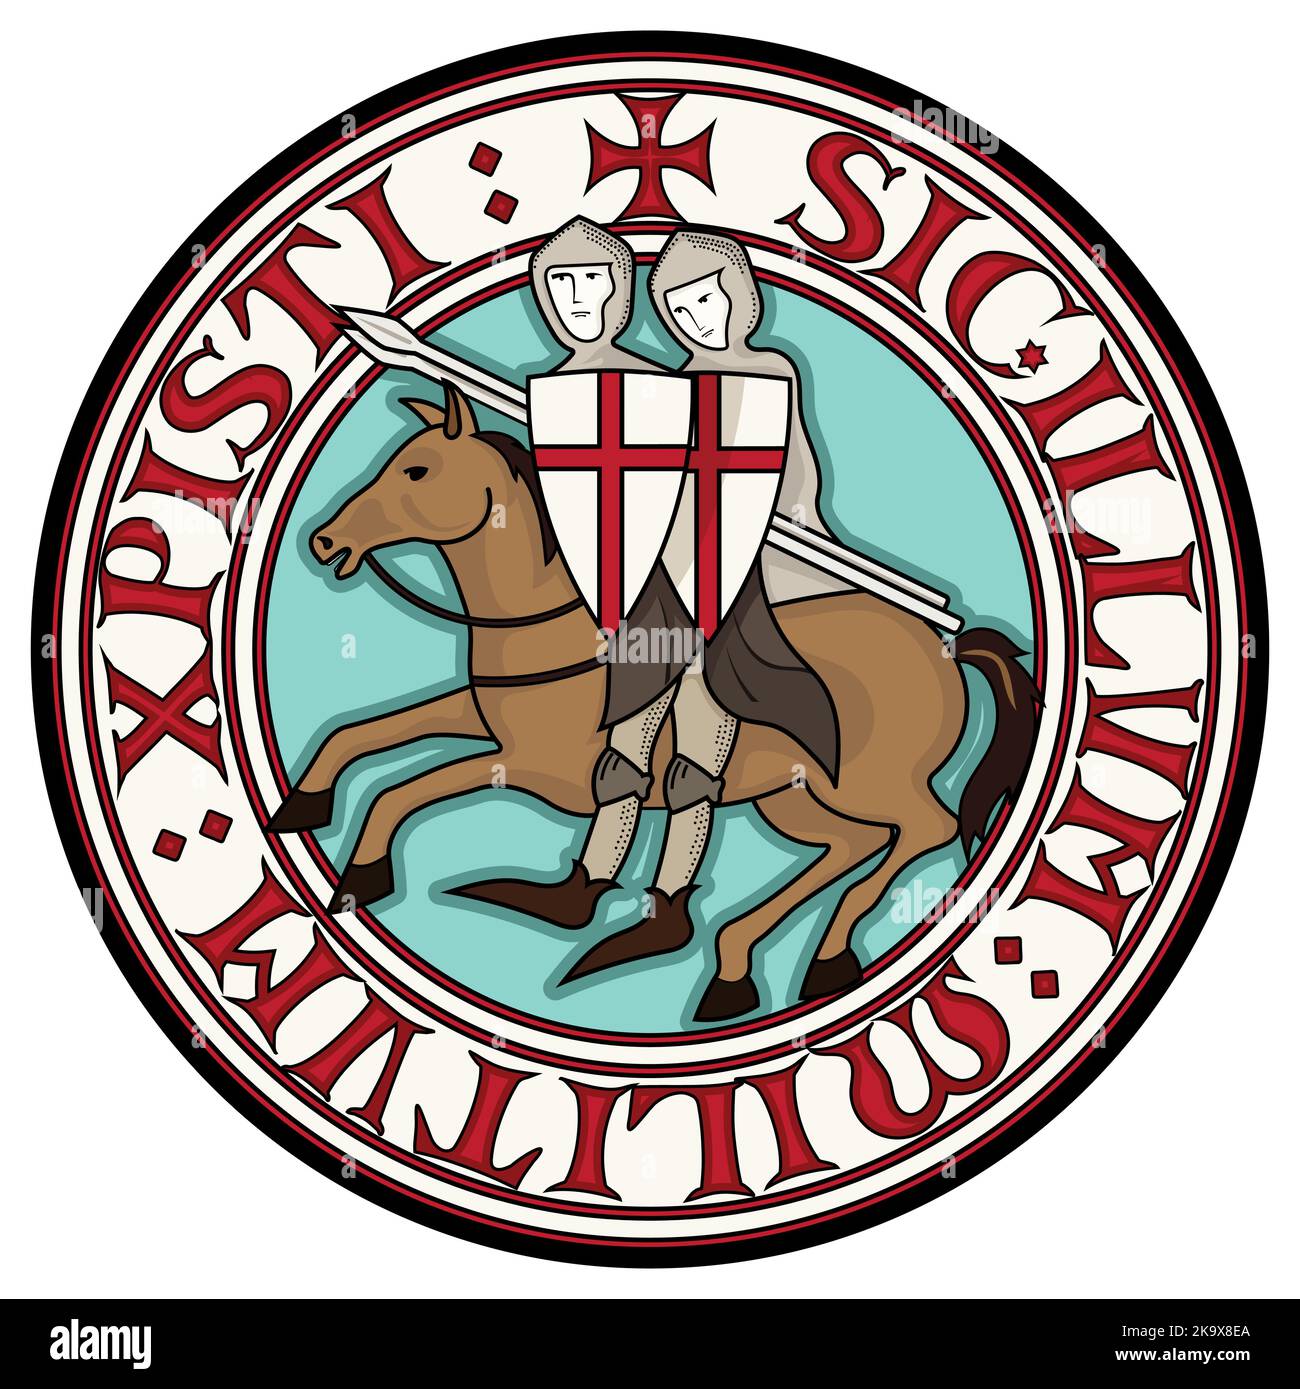 Sign Of The Knight Templars. Two knight Crusader on horseback with spears, in a circle from the text of the slogan of the knights Templar Stock Vector